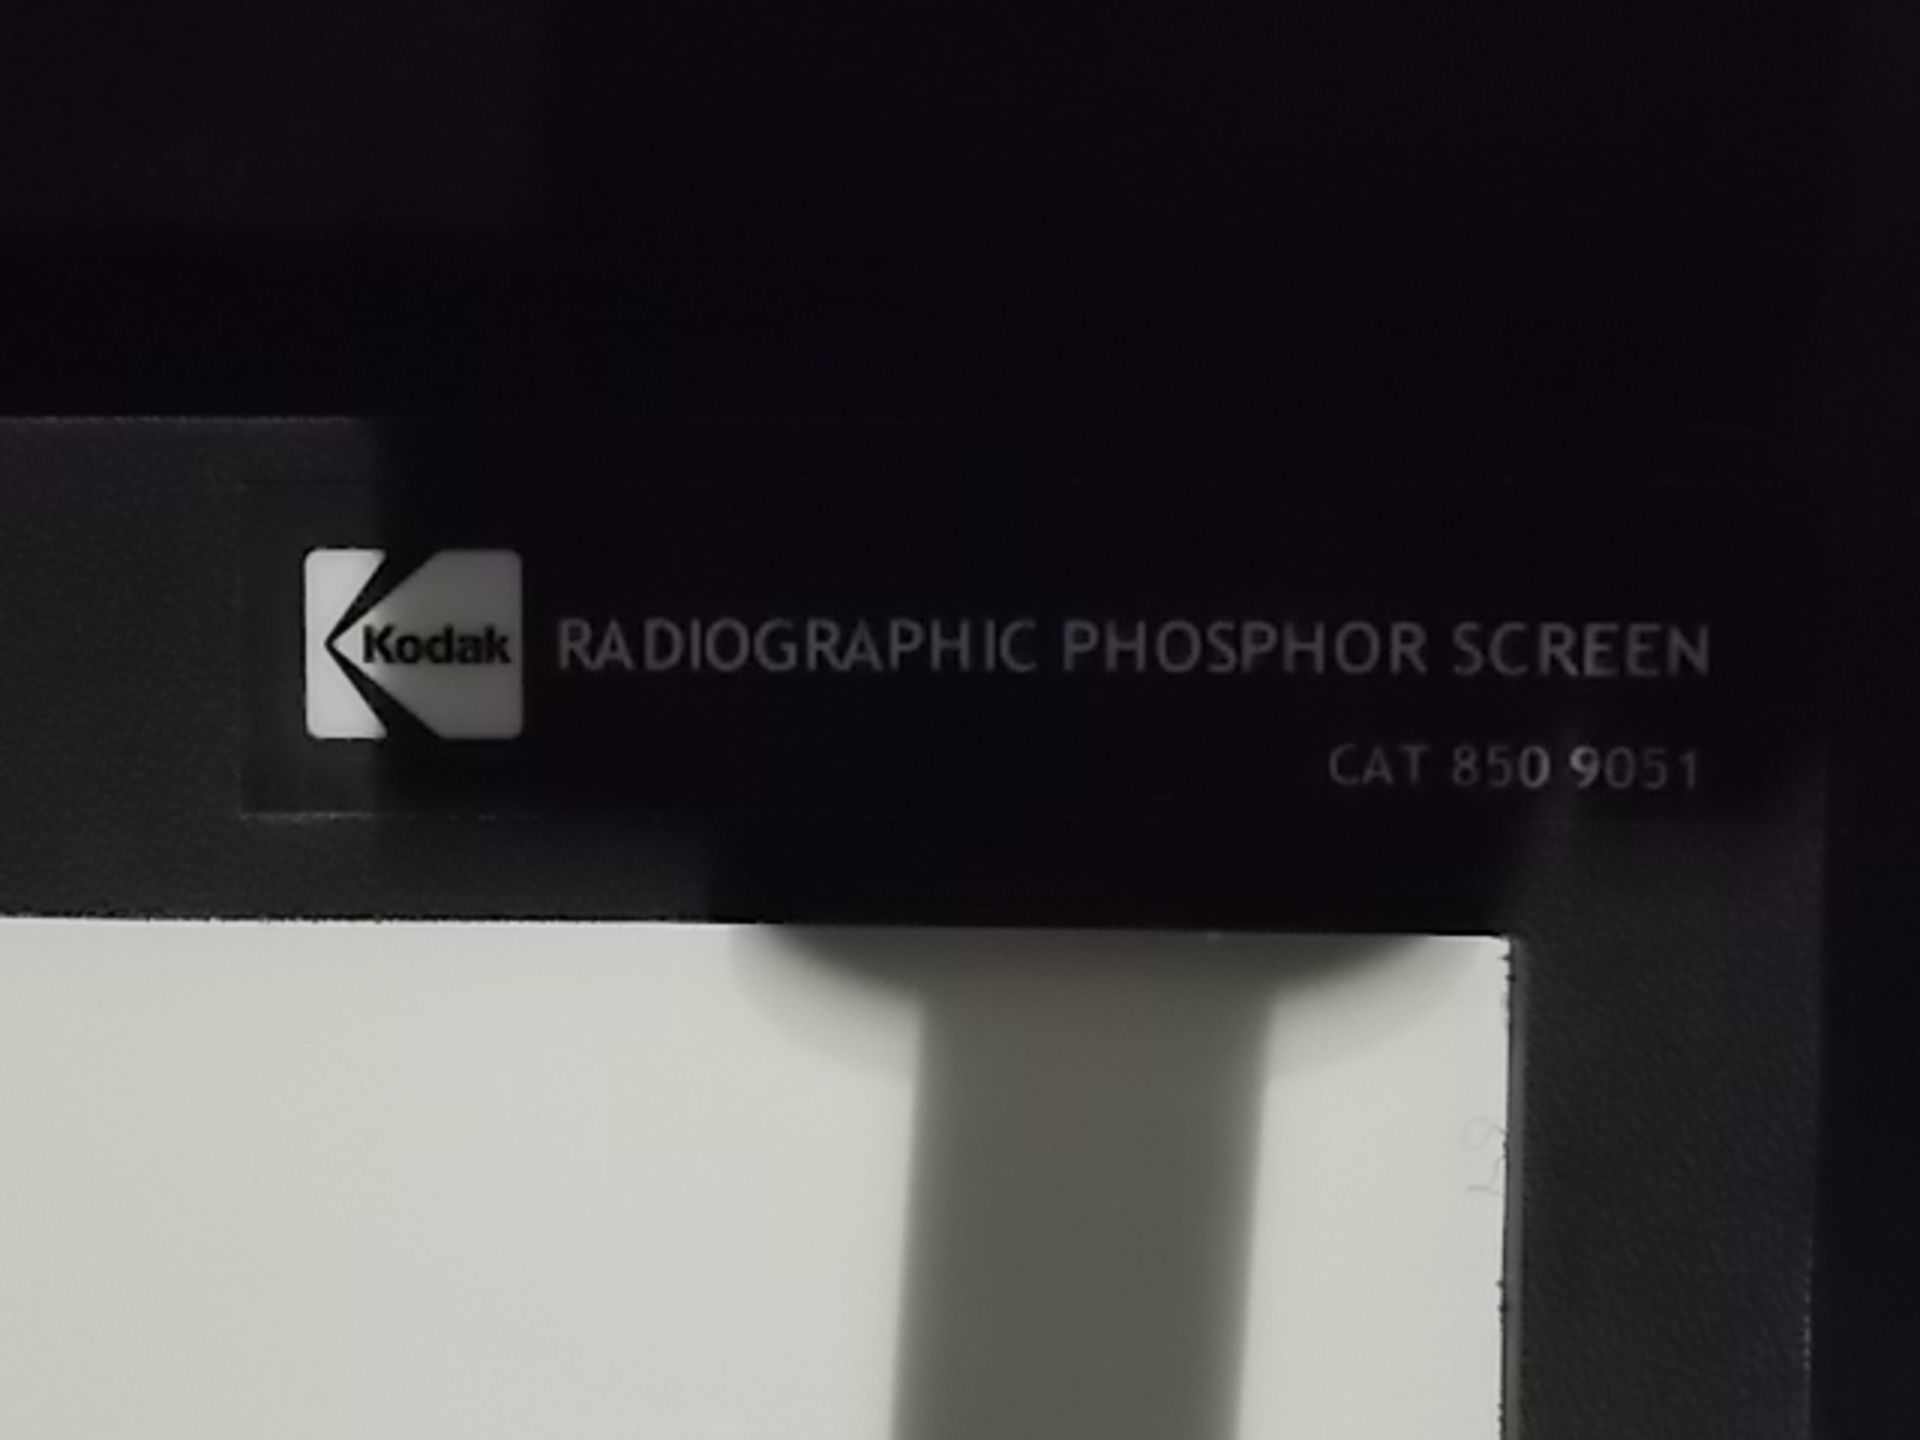 Kodak Image Station 4000mm X-Ray Module In-Vivo Imaging Systems, Qty 1, 221224394278 - Image 9 of 33